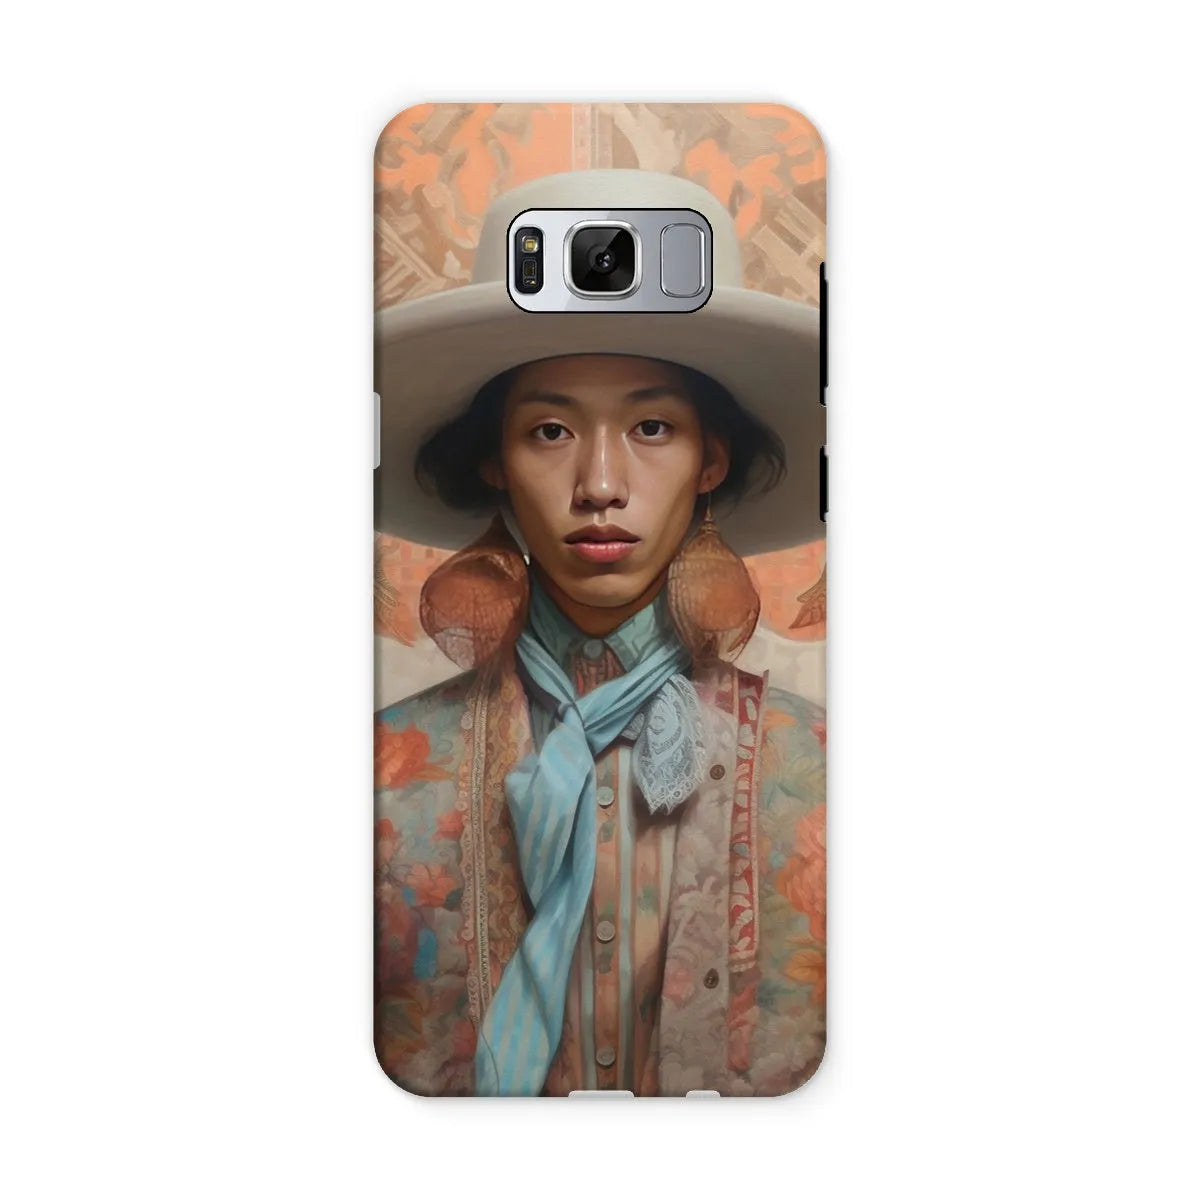 Iyaan The Gay Cowboy - Dandy Gay Aesthetic Art Phone Case - Samsung Galaxy S8 / Matte - Mobile Phone Cases - Aesthetic